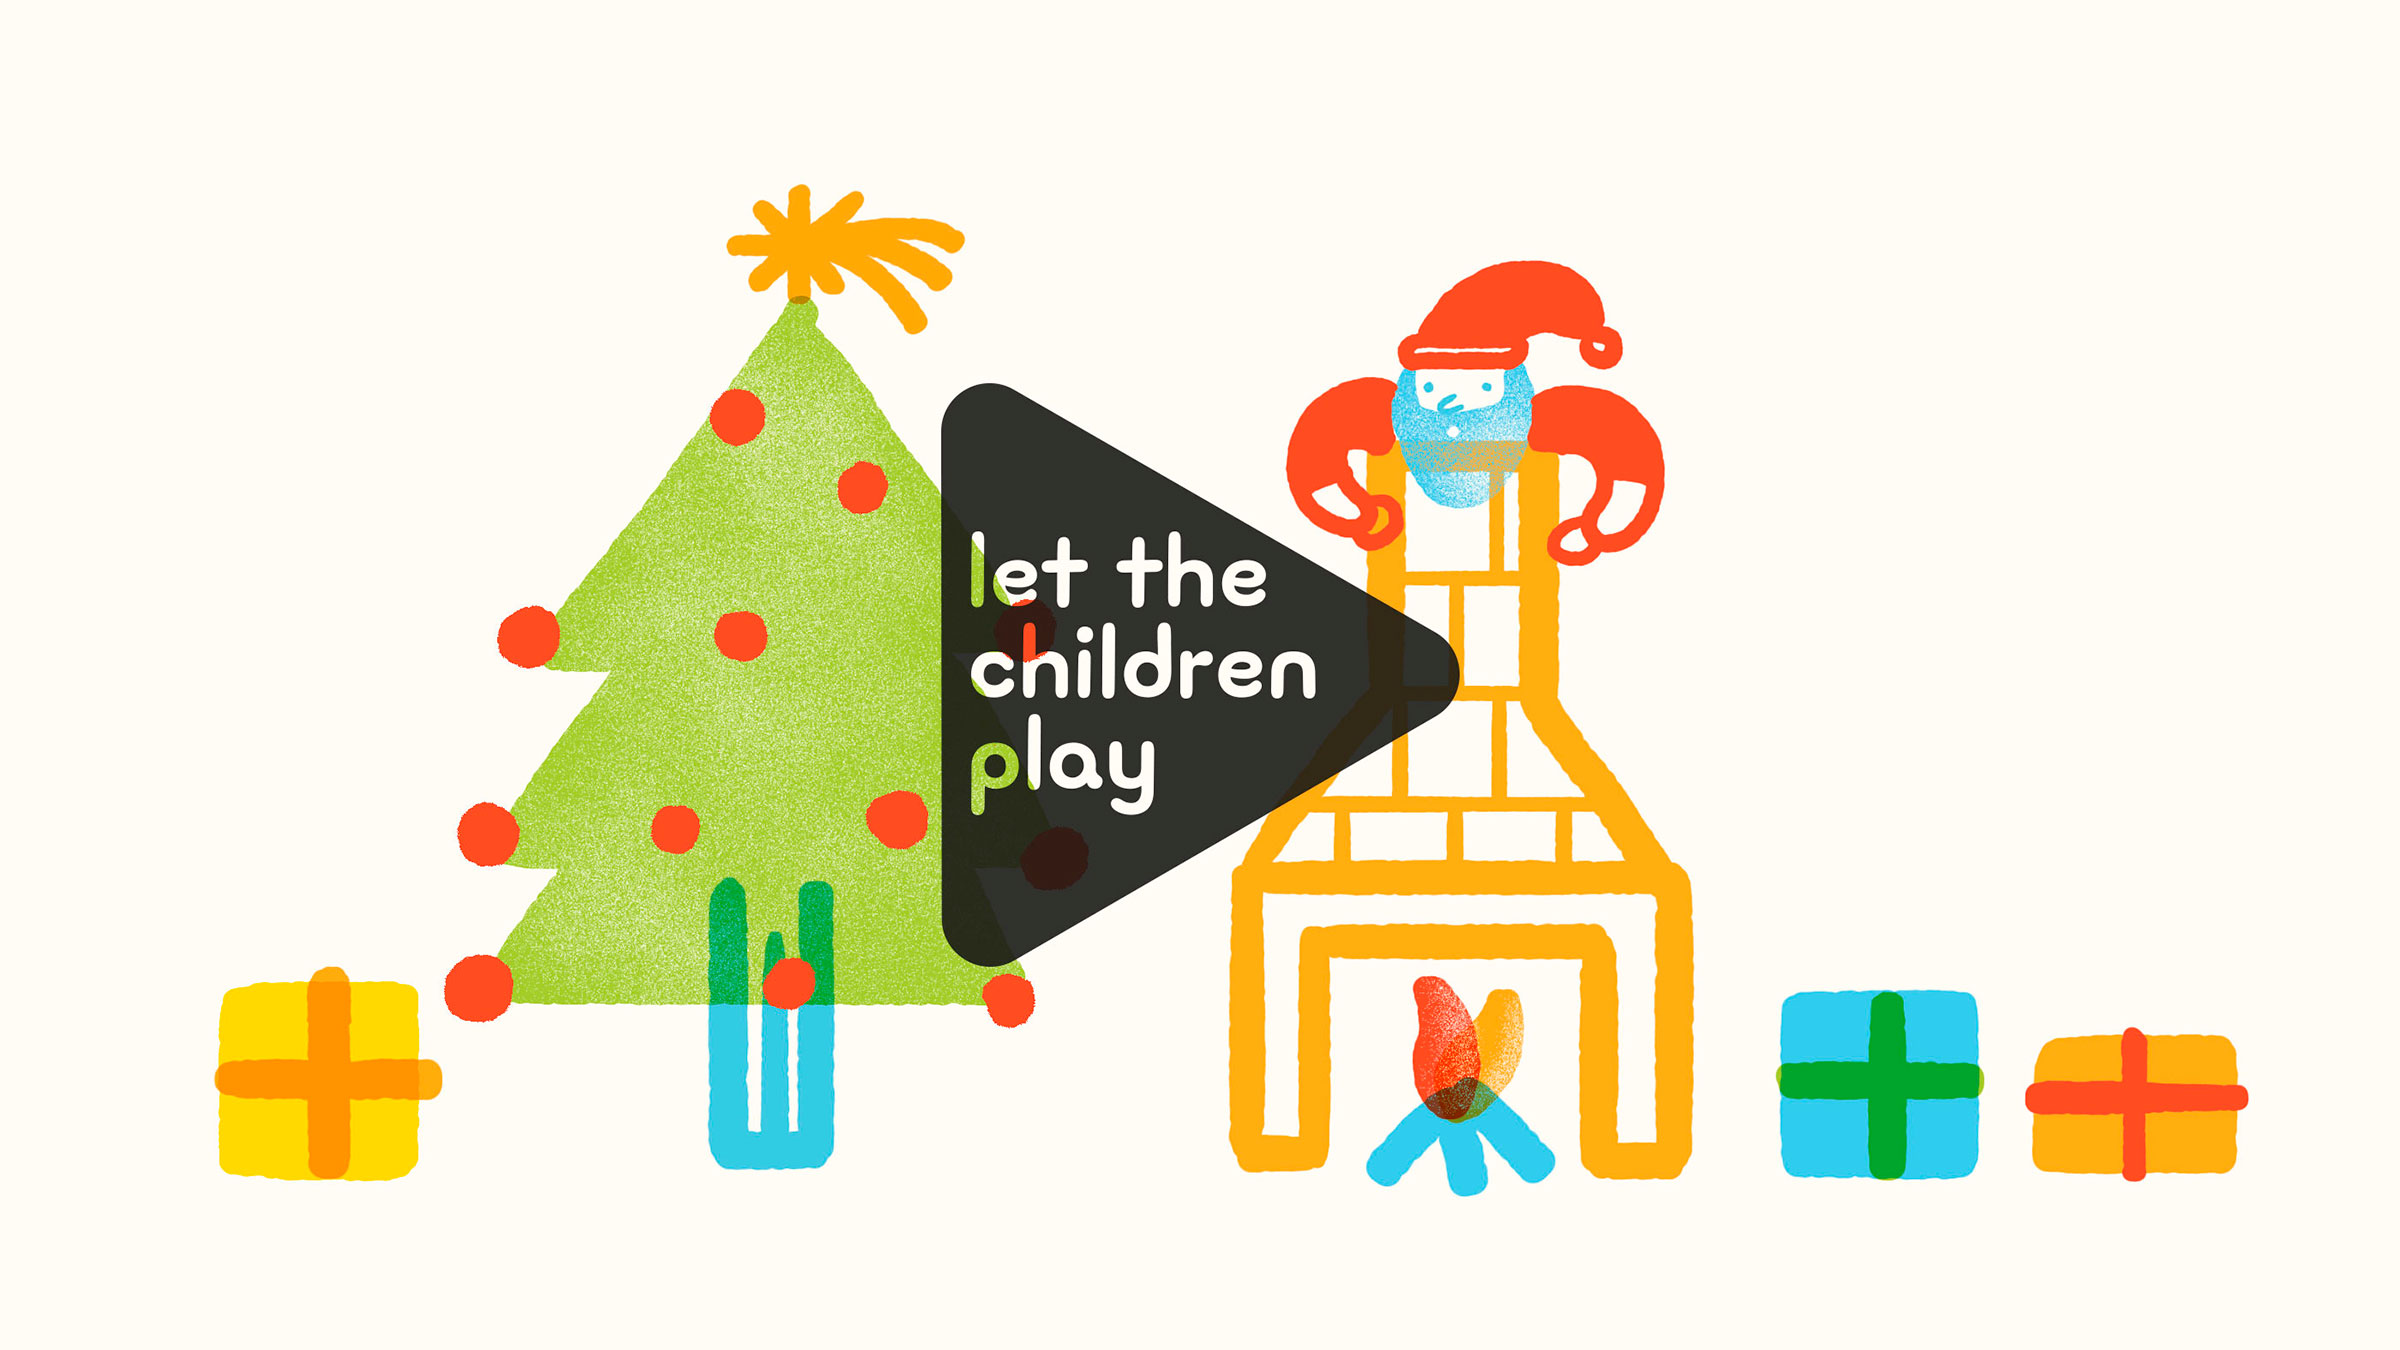 RPS - Let the children play - Xmas